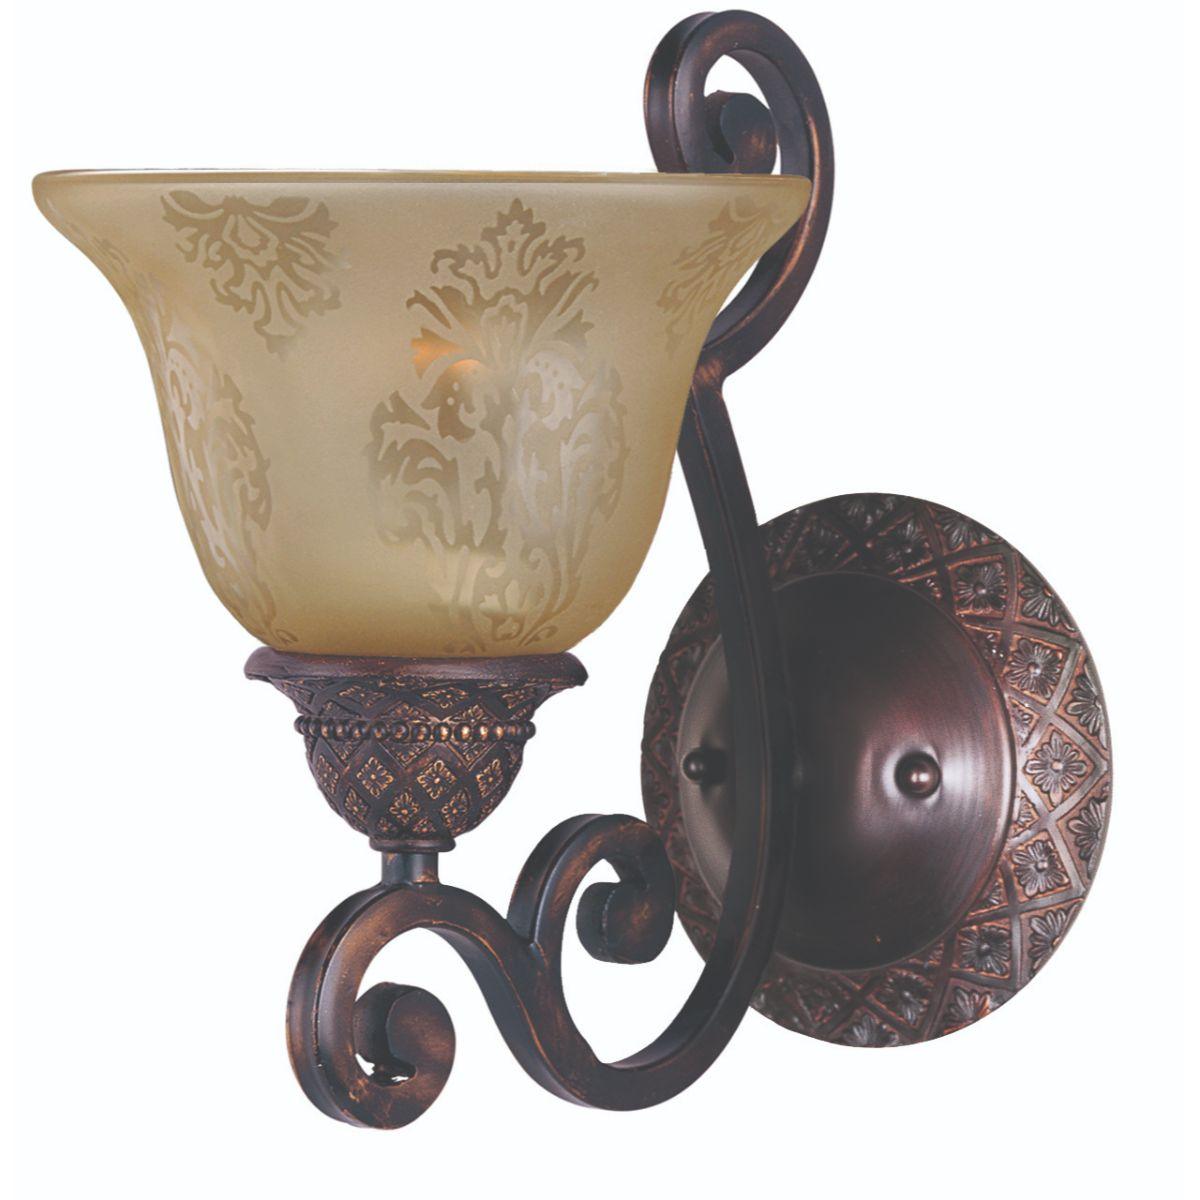 Symphony 11 in. Armed Sconce Oil-Rubbed Bronze finish